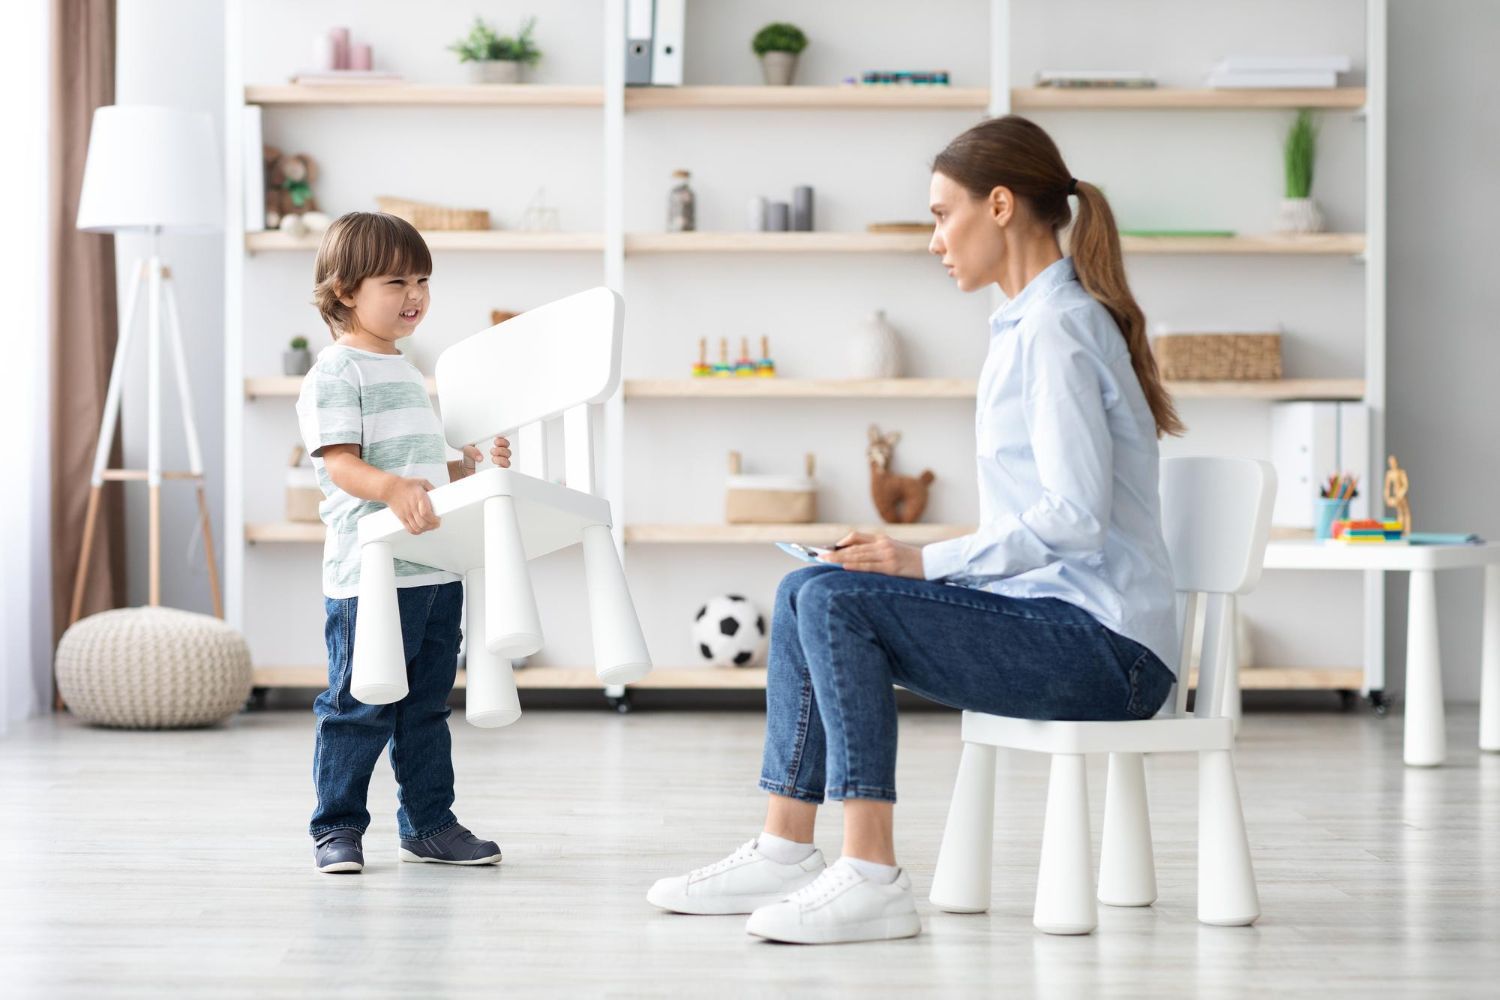 A woman sitting on a chair next to a child standing